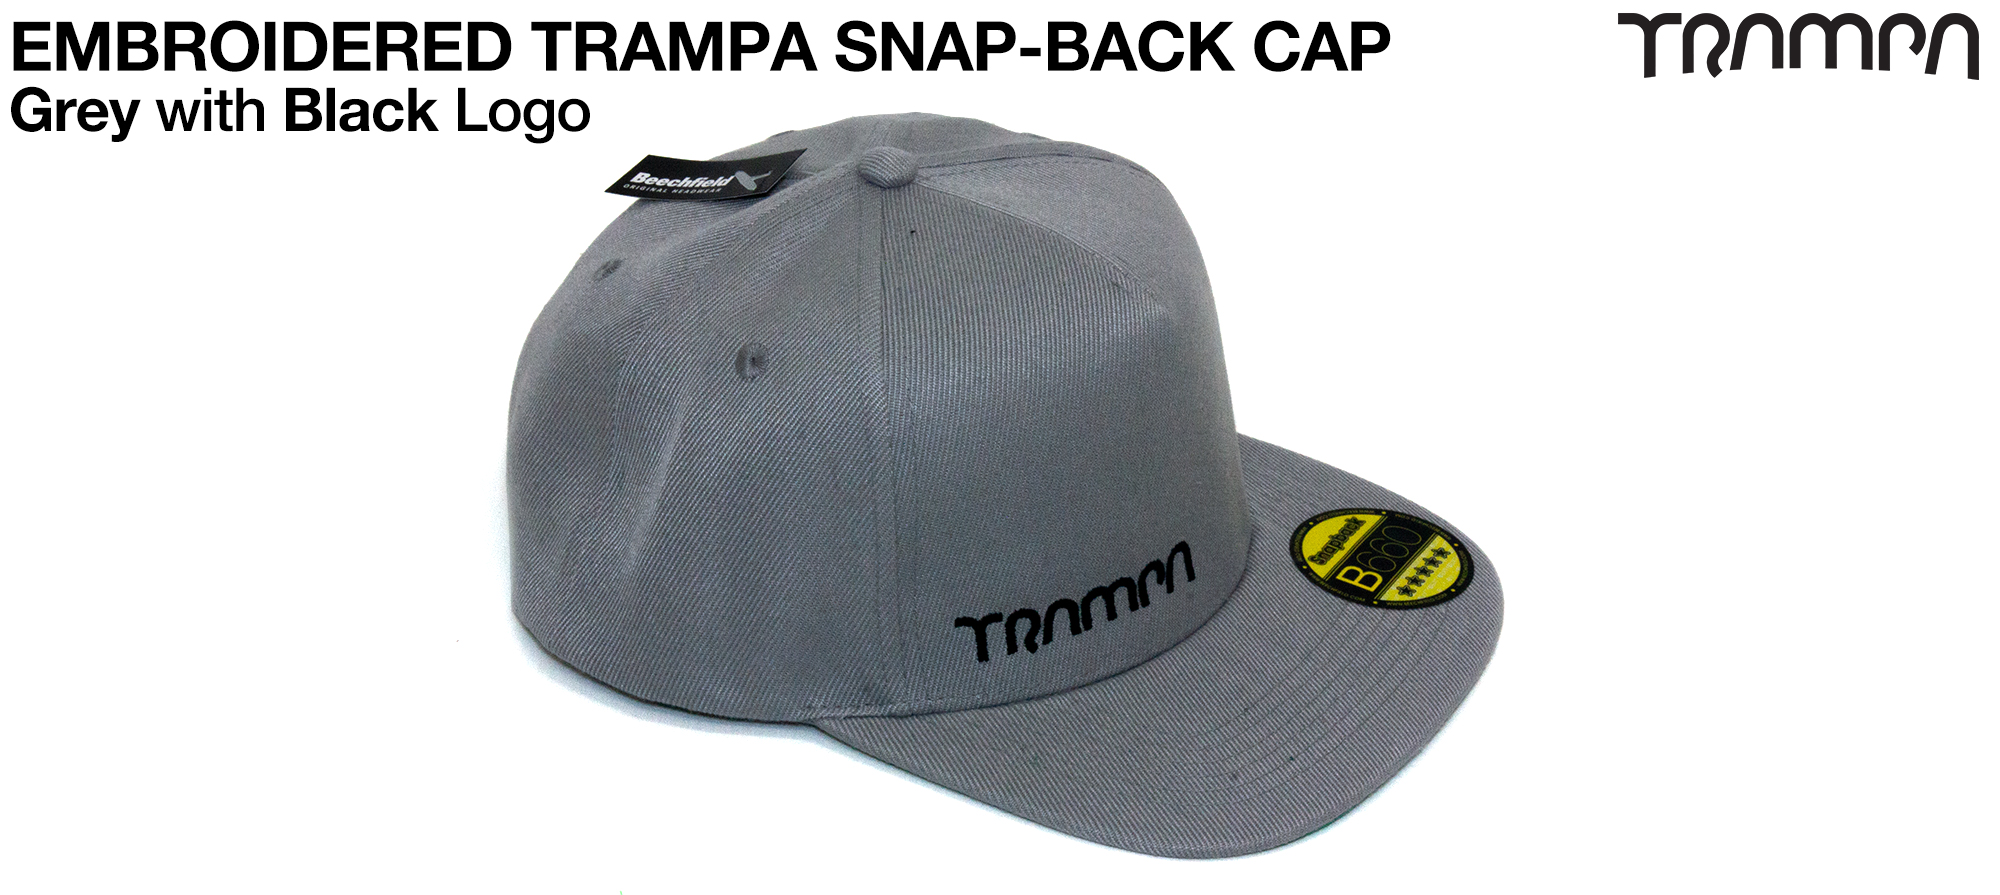 Marl GREY SNAPBACK Cap with BLACK embroidered TRAMPA logo